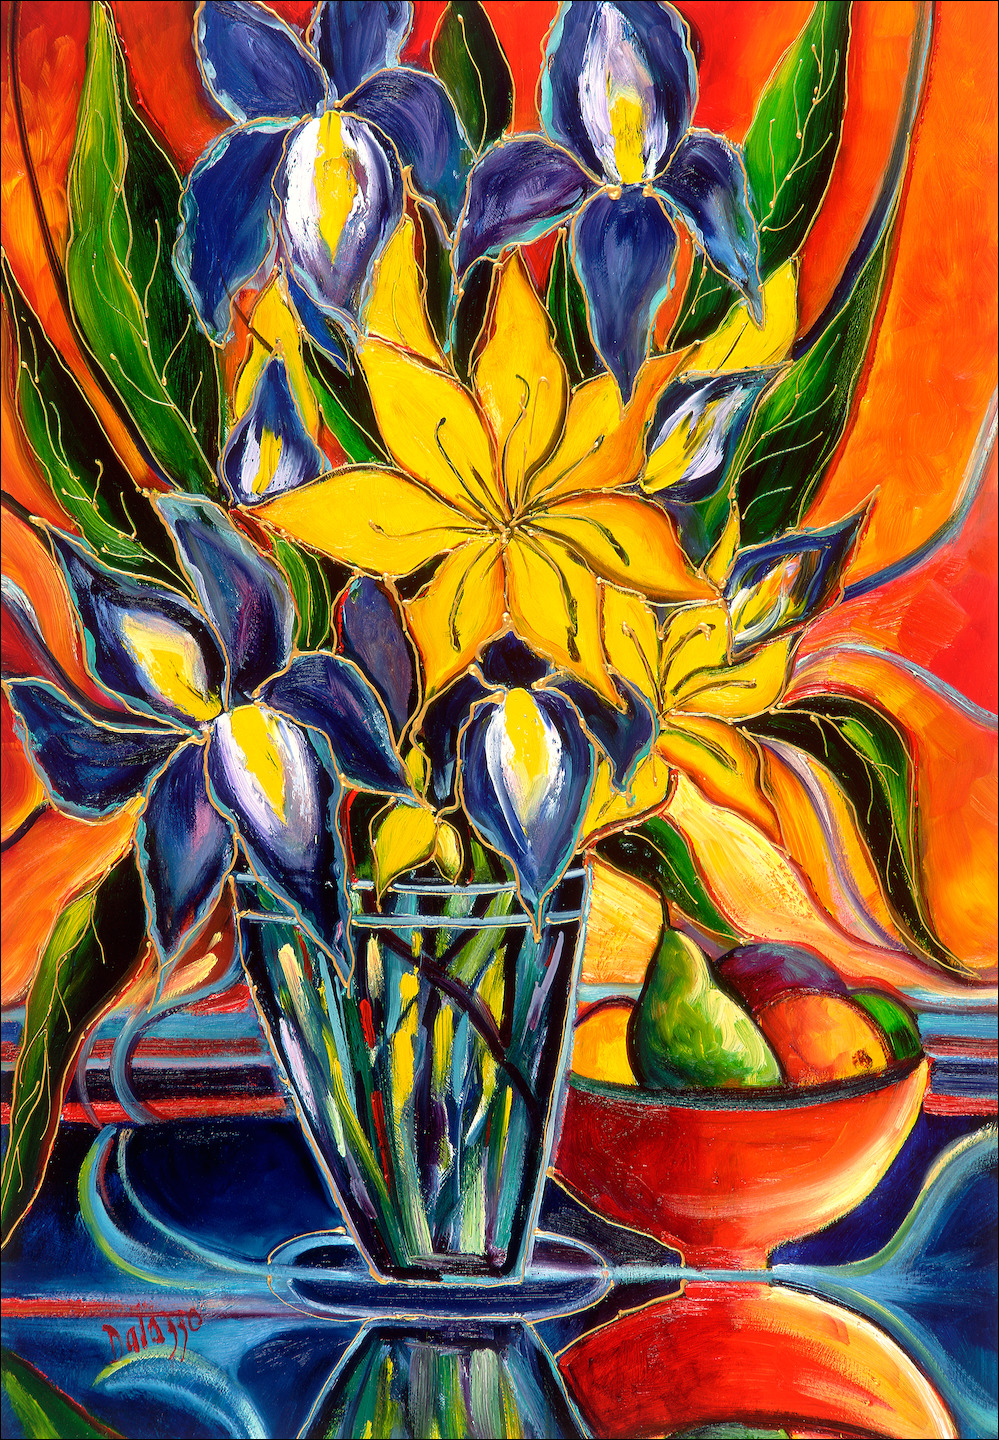 Floral Still Life "Iris and Lilies" Original Artwork by Lucette Dalozzo